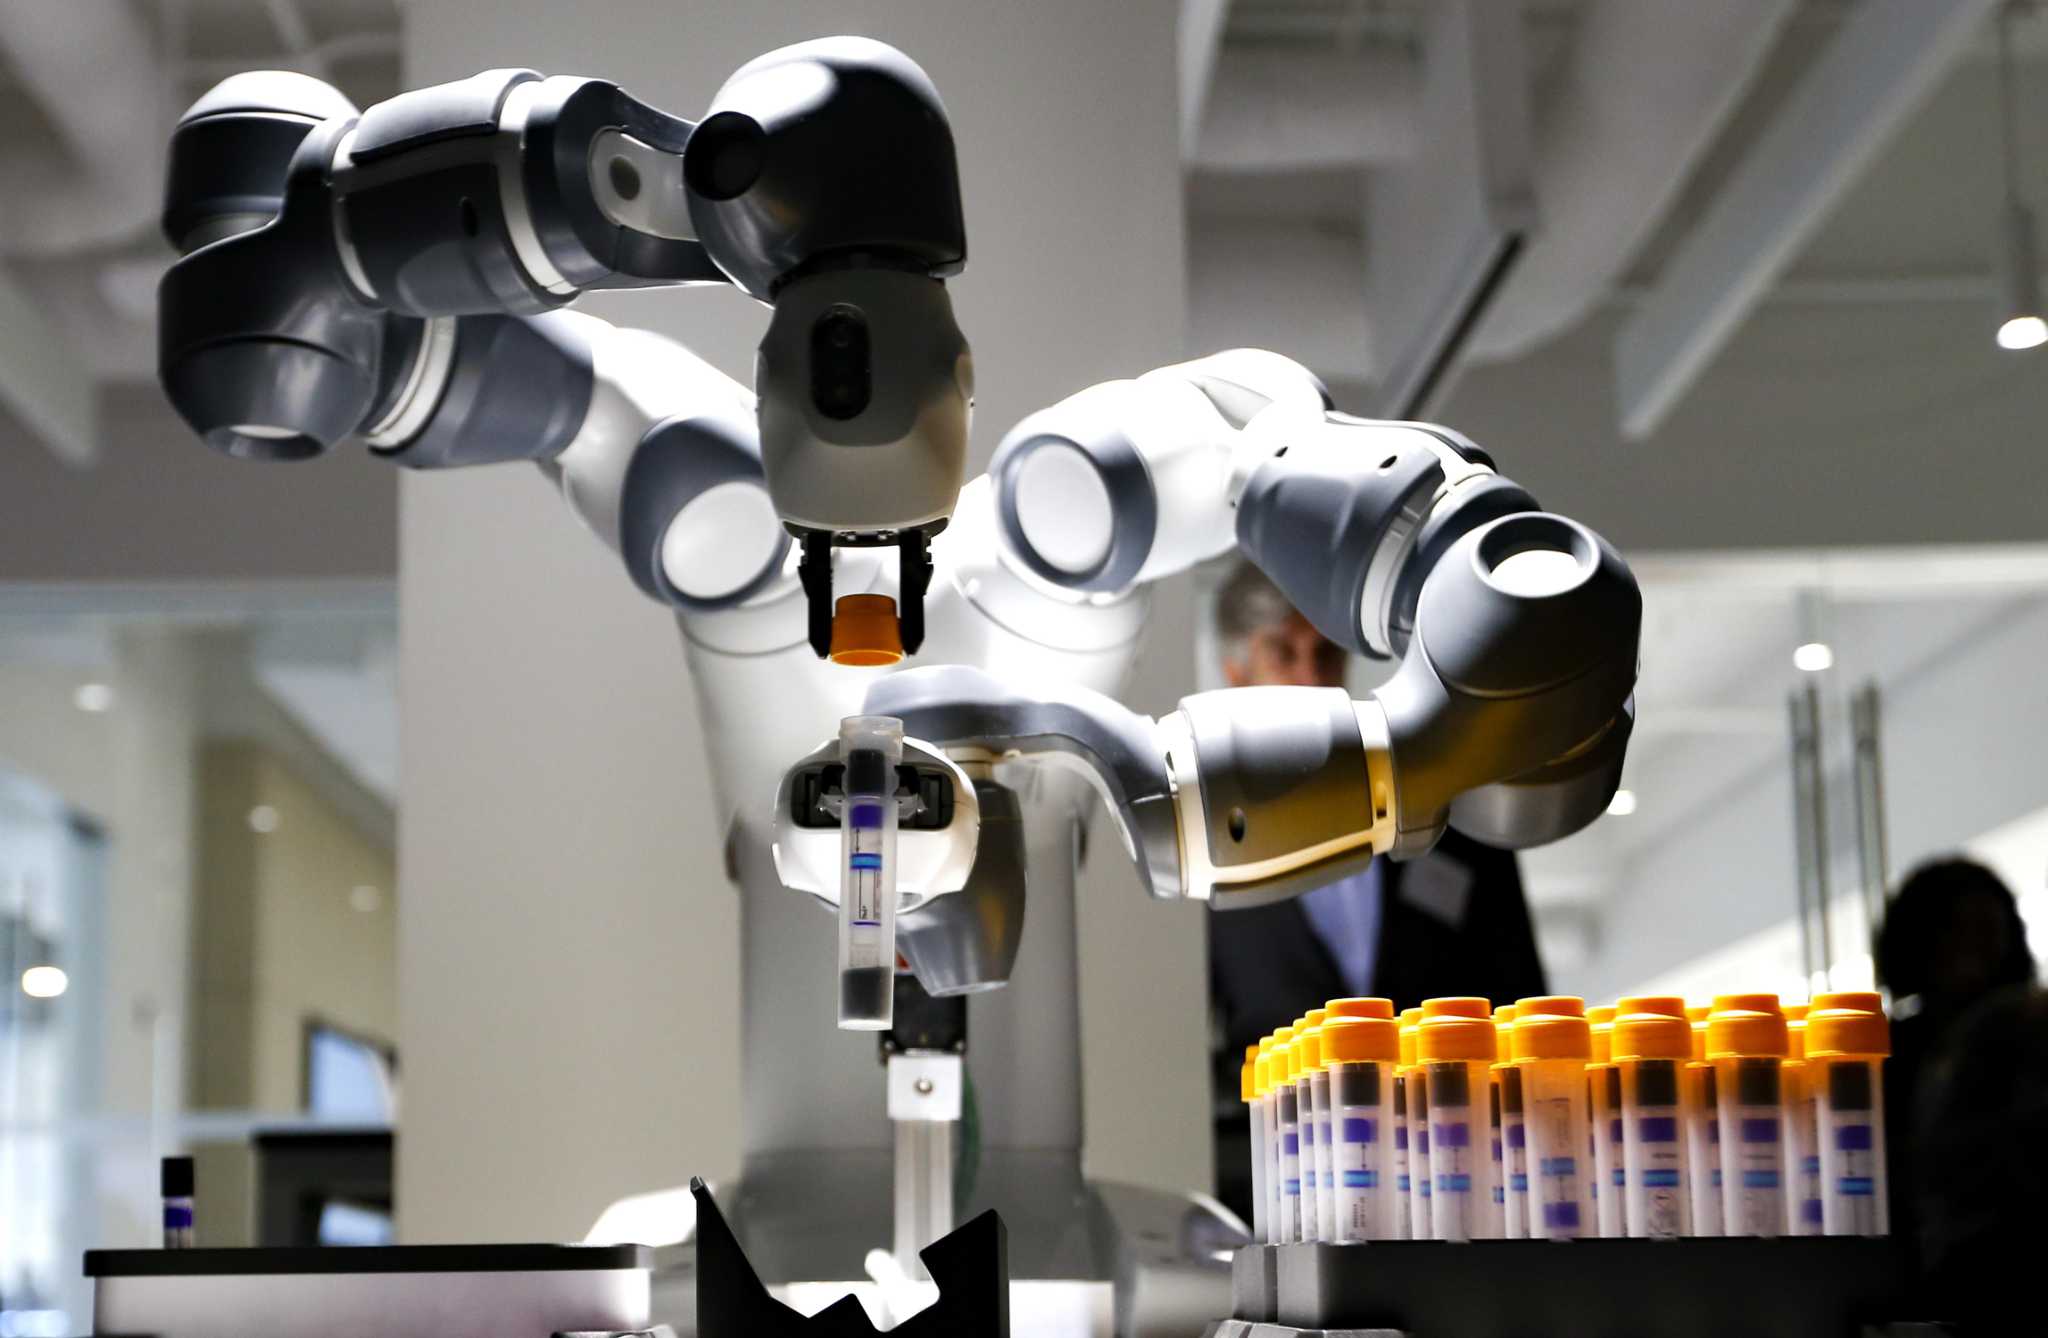 As robots move into health care, new R&D facility opens in medical center